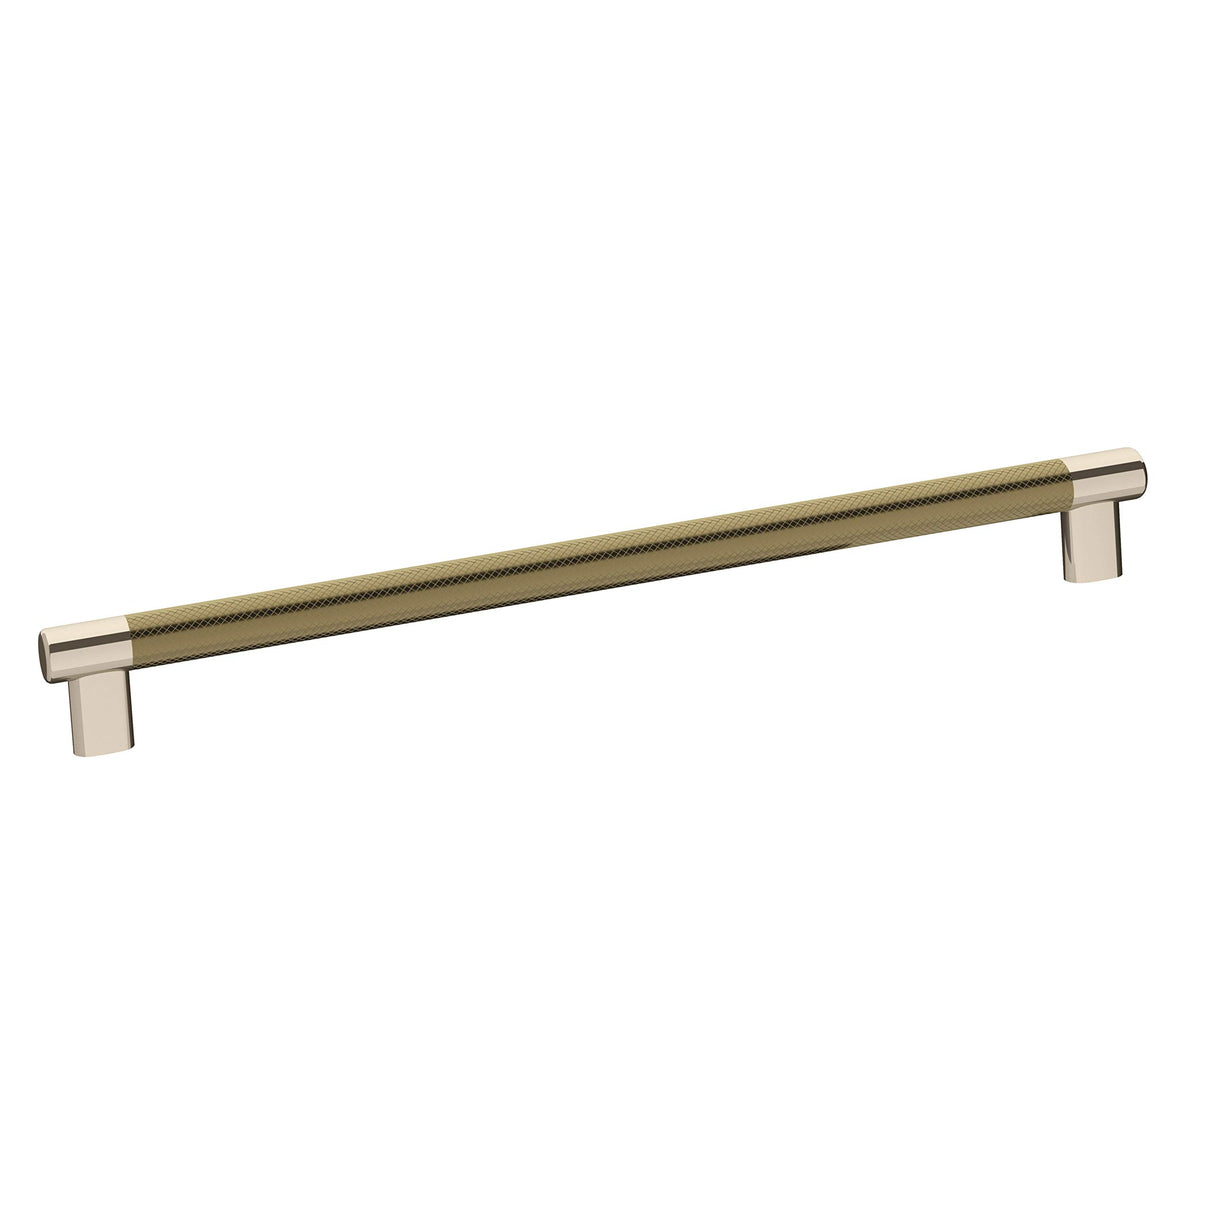 Amerock Cabinet Pull Polished Nickel/Golden Champagne 12-5/8 inch (320 mm) Center-to-Center Esquire 1 Pack Drawer Pull Drawer Handle Cabinet Hardware